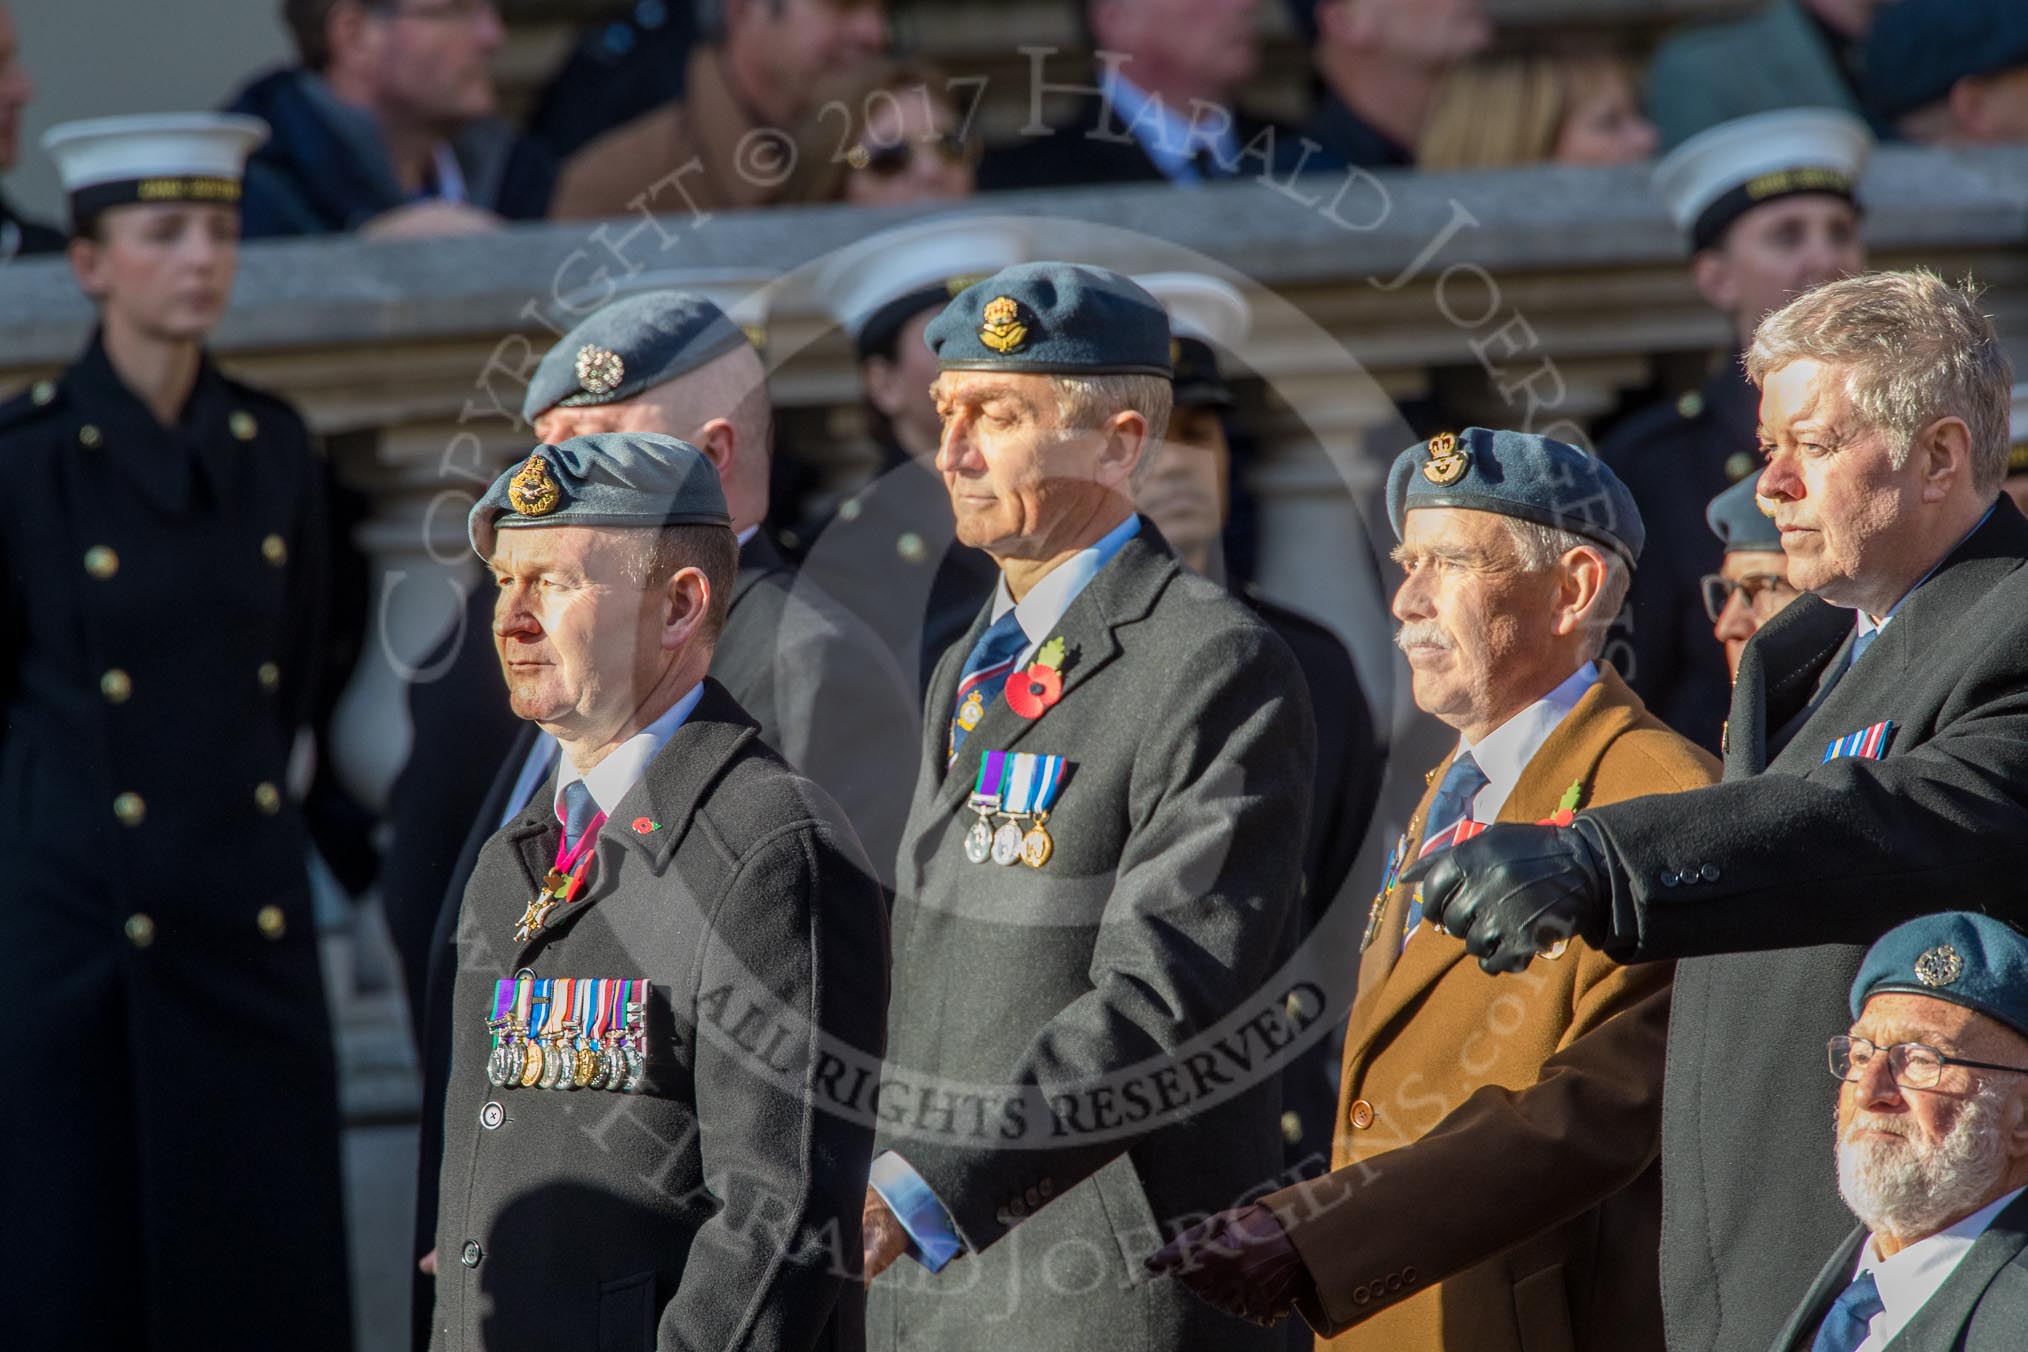 Royal Air Force Servicing Commando and Tactical Supply Wing Association (Group C36, 50 members) during the Royal British Legion March Past on Remembrance Sunday at the Cenotaph, Whitehall, Westminster, London, 11 November 2018, 12:20.